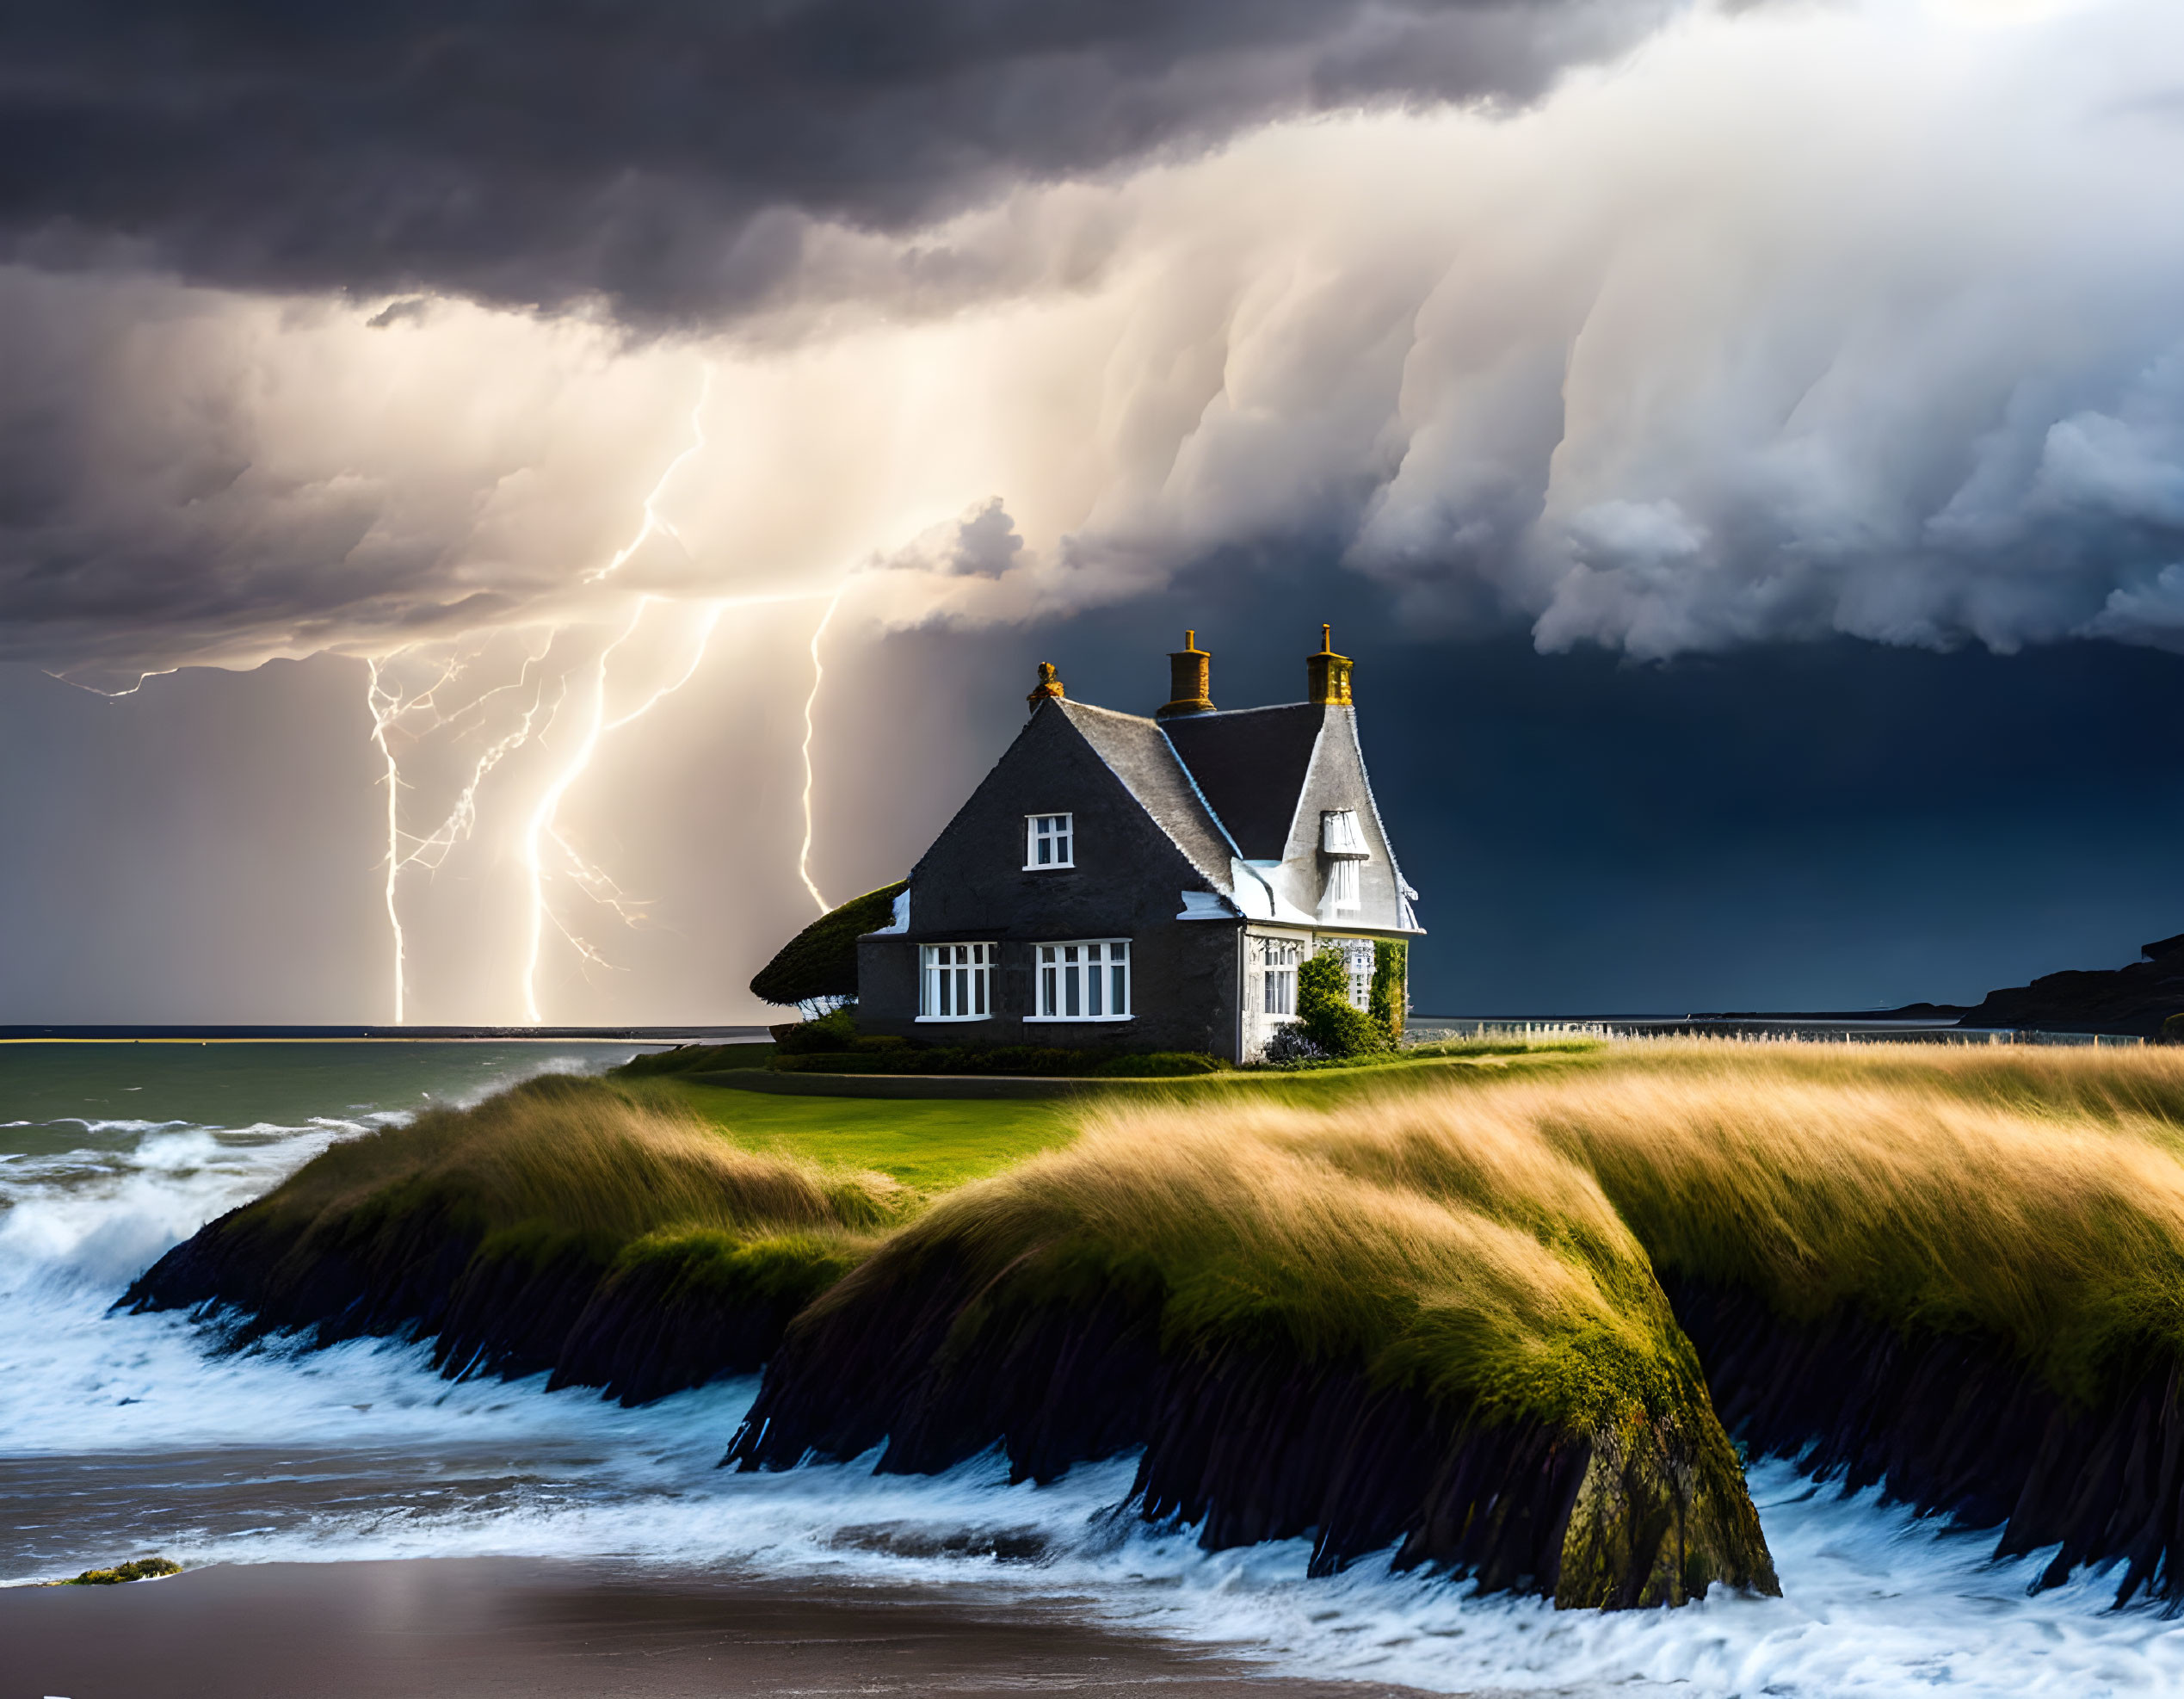 House on cliff struck by lightning in stormy sky above turbulent sea